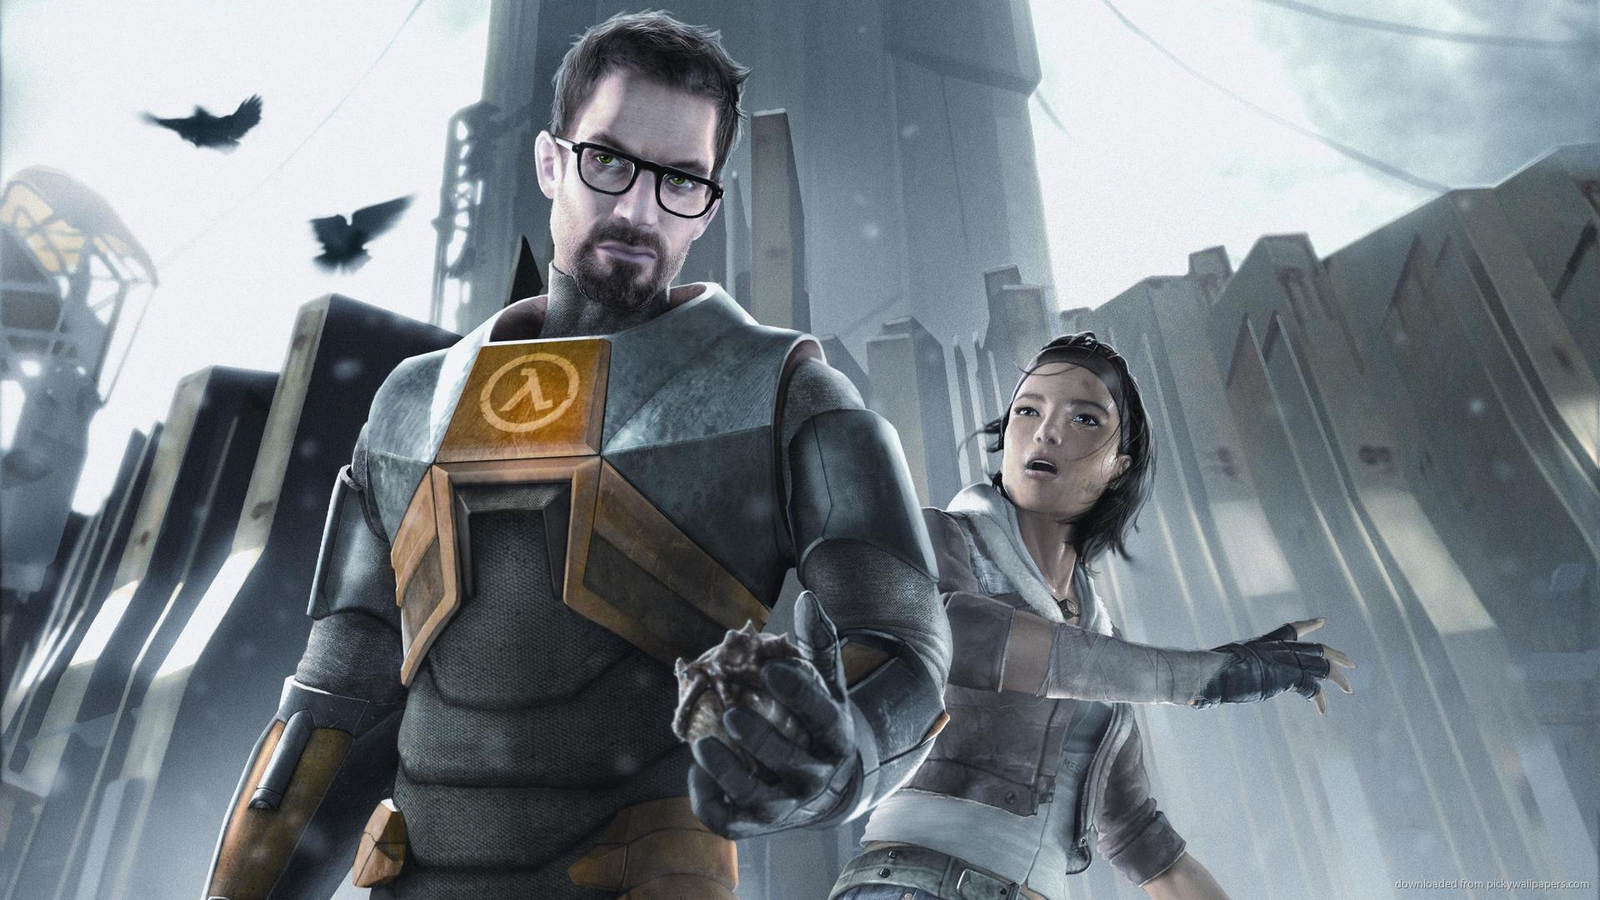 It's a Shame That Half-Life Alyx is a Shooter – Futurus